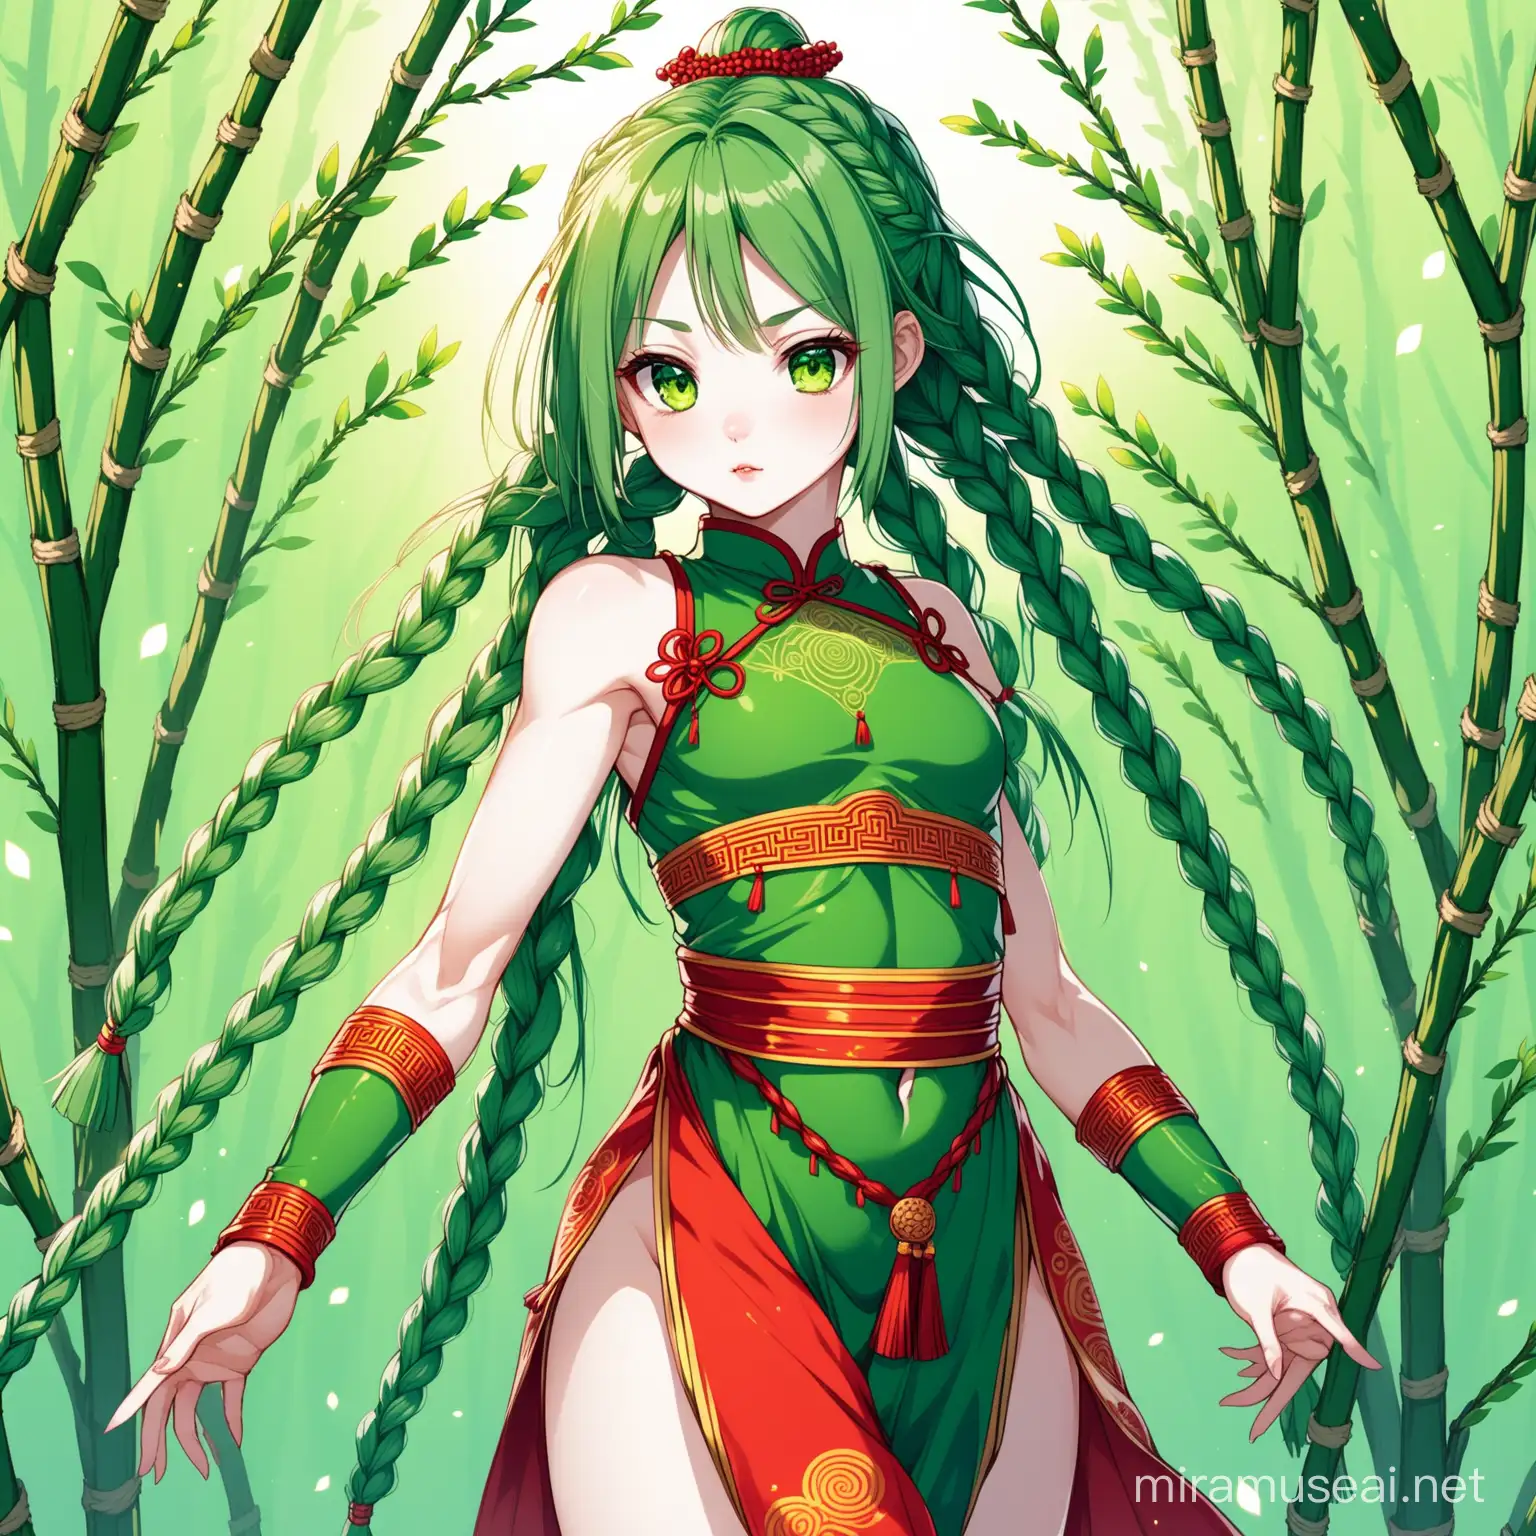 AnimeStyle Chinese Ritual Dancer with Braided Willow Branch Hair